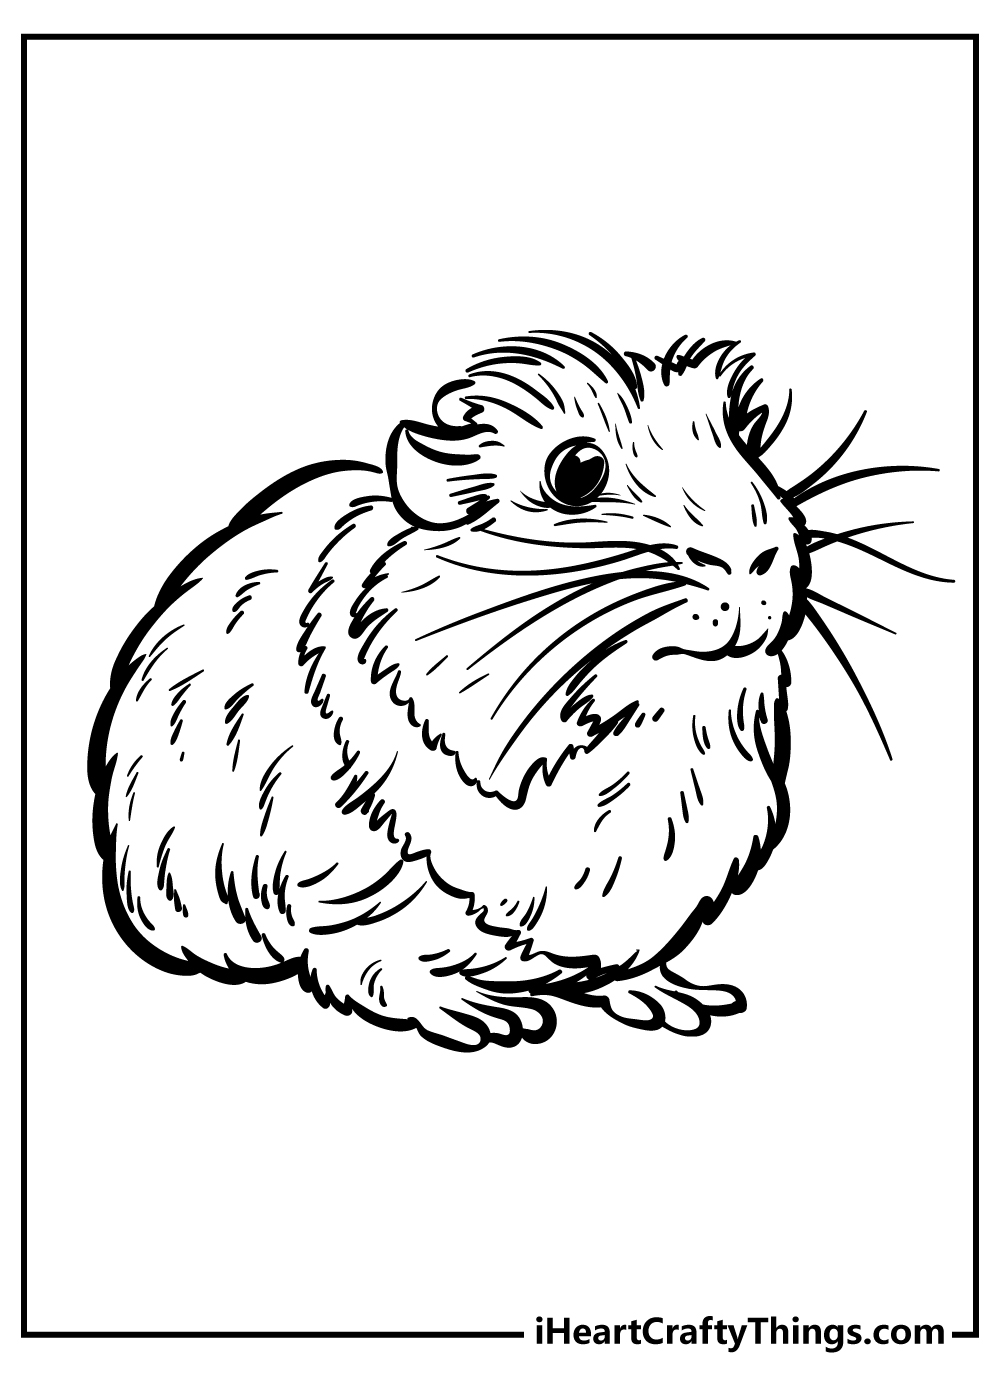 Guinea Pig Coloring Pages for preschoolers free printable